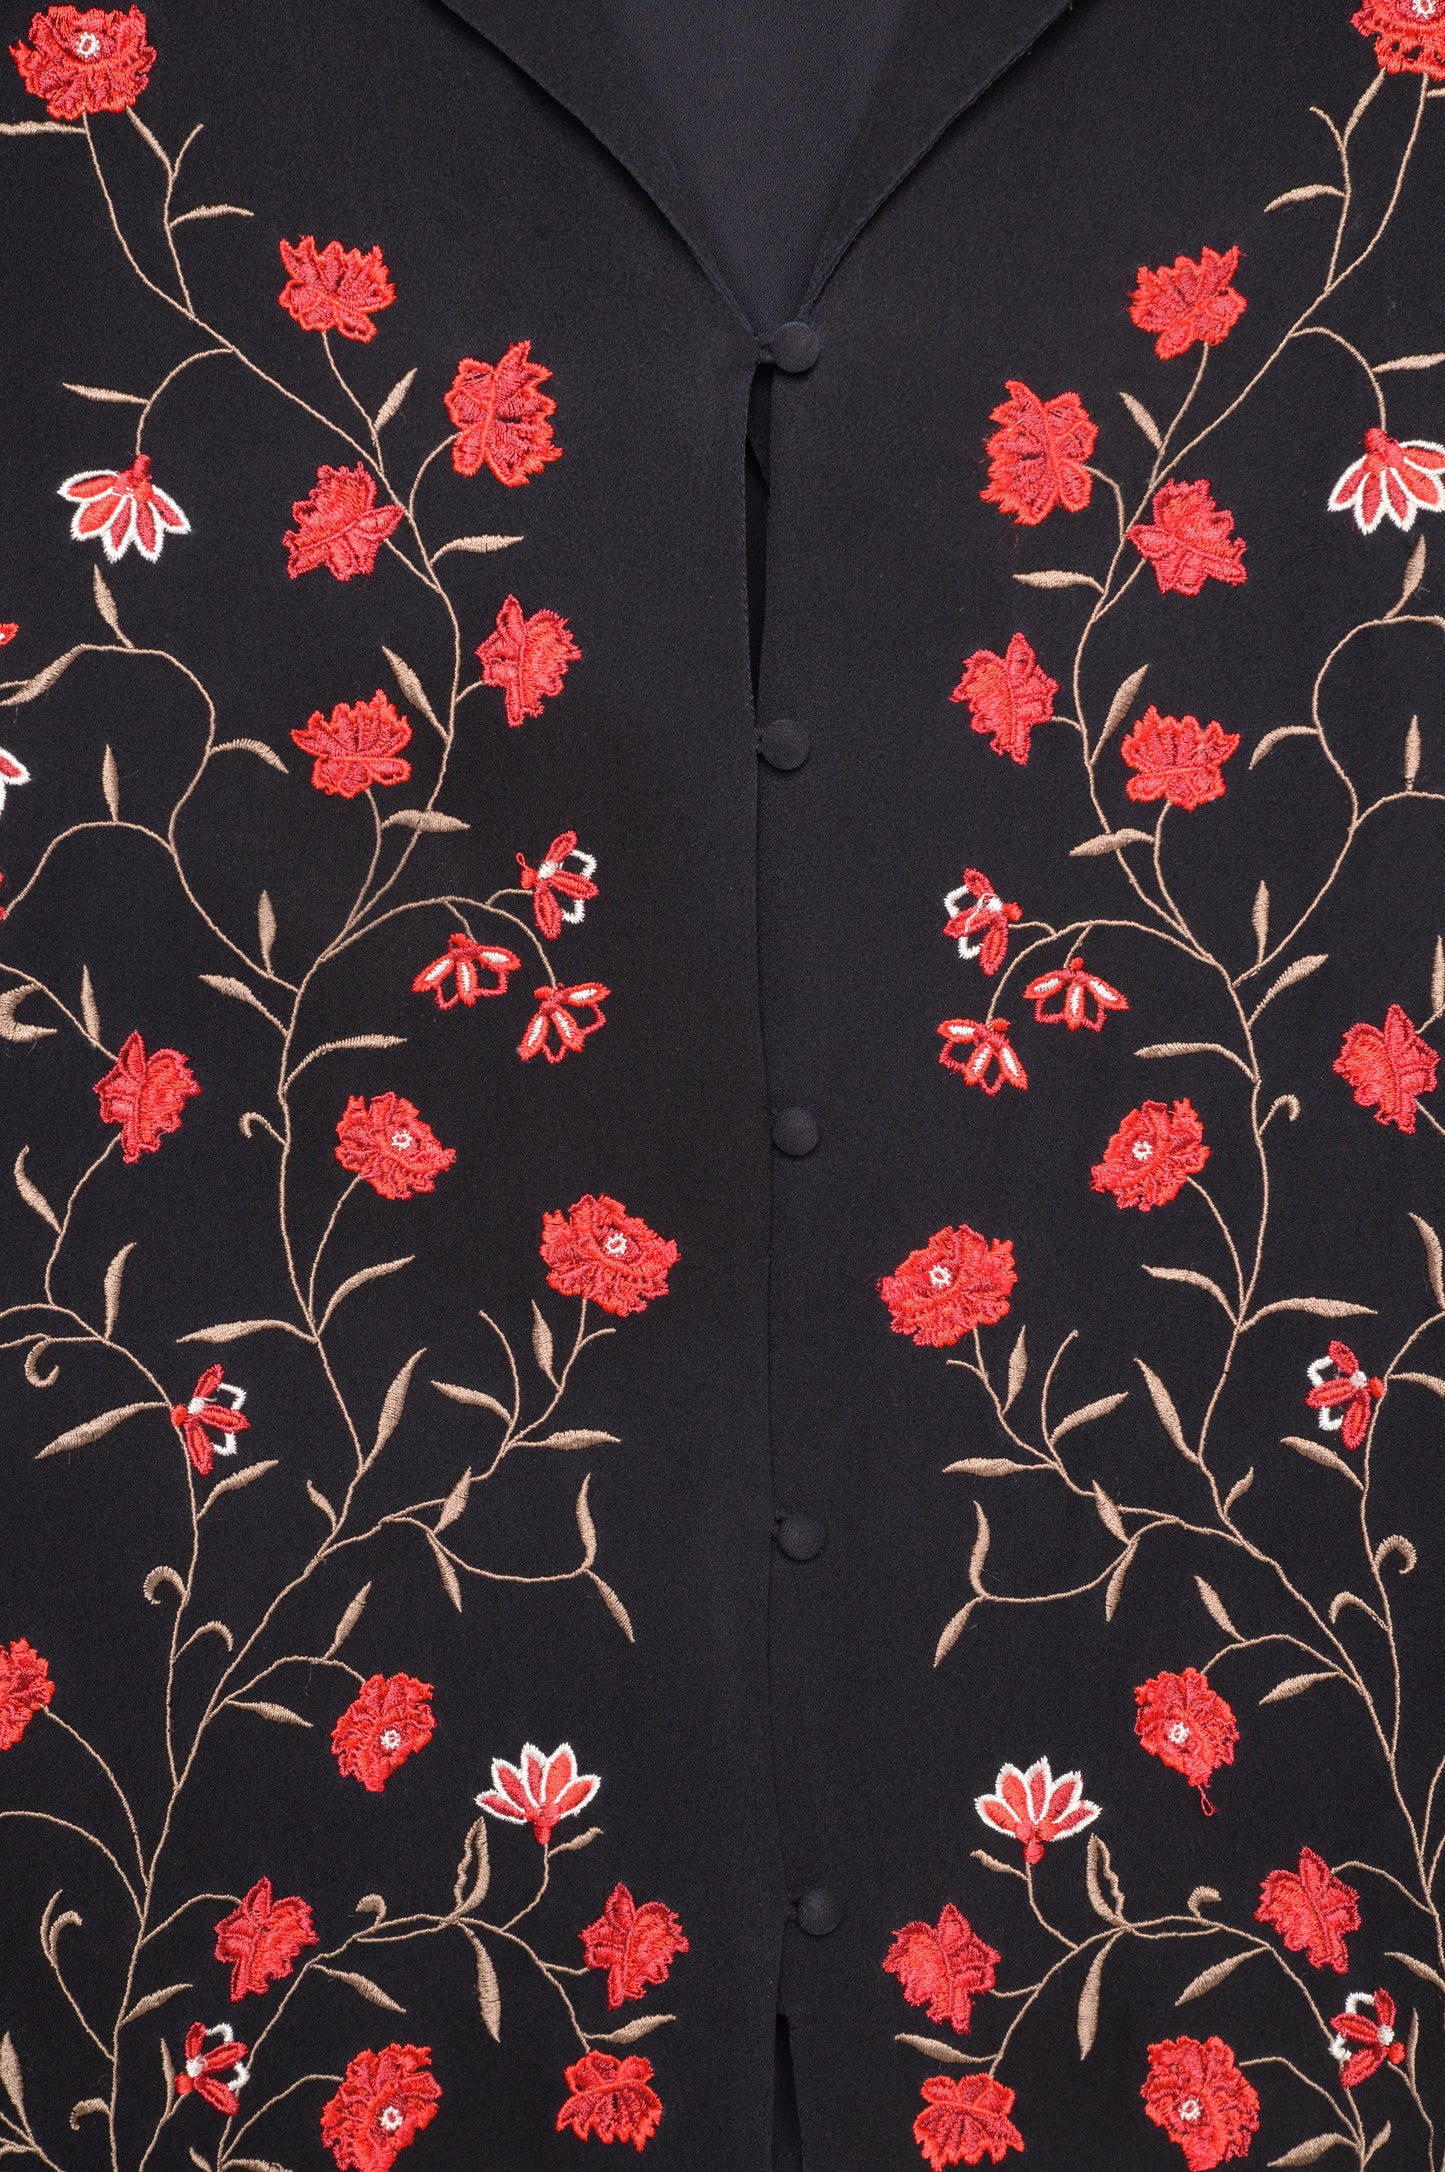 1990s Embroidered Silk Floral Button Top